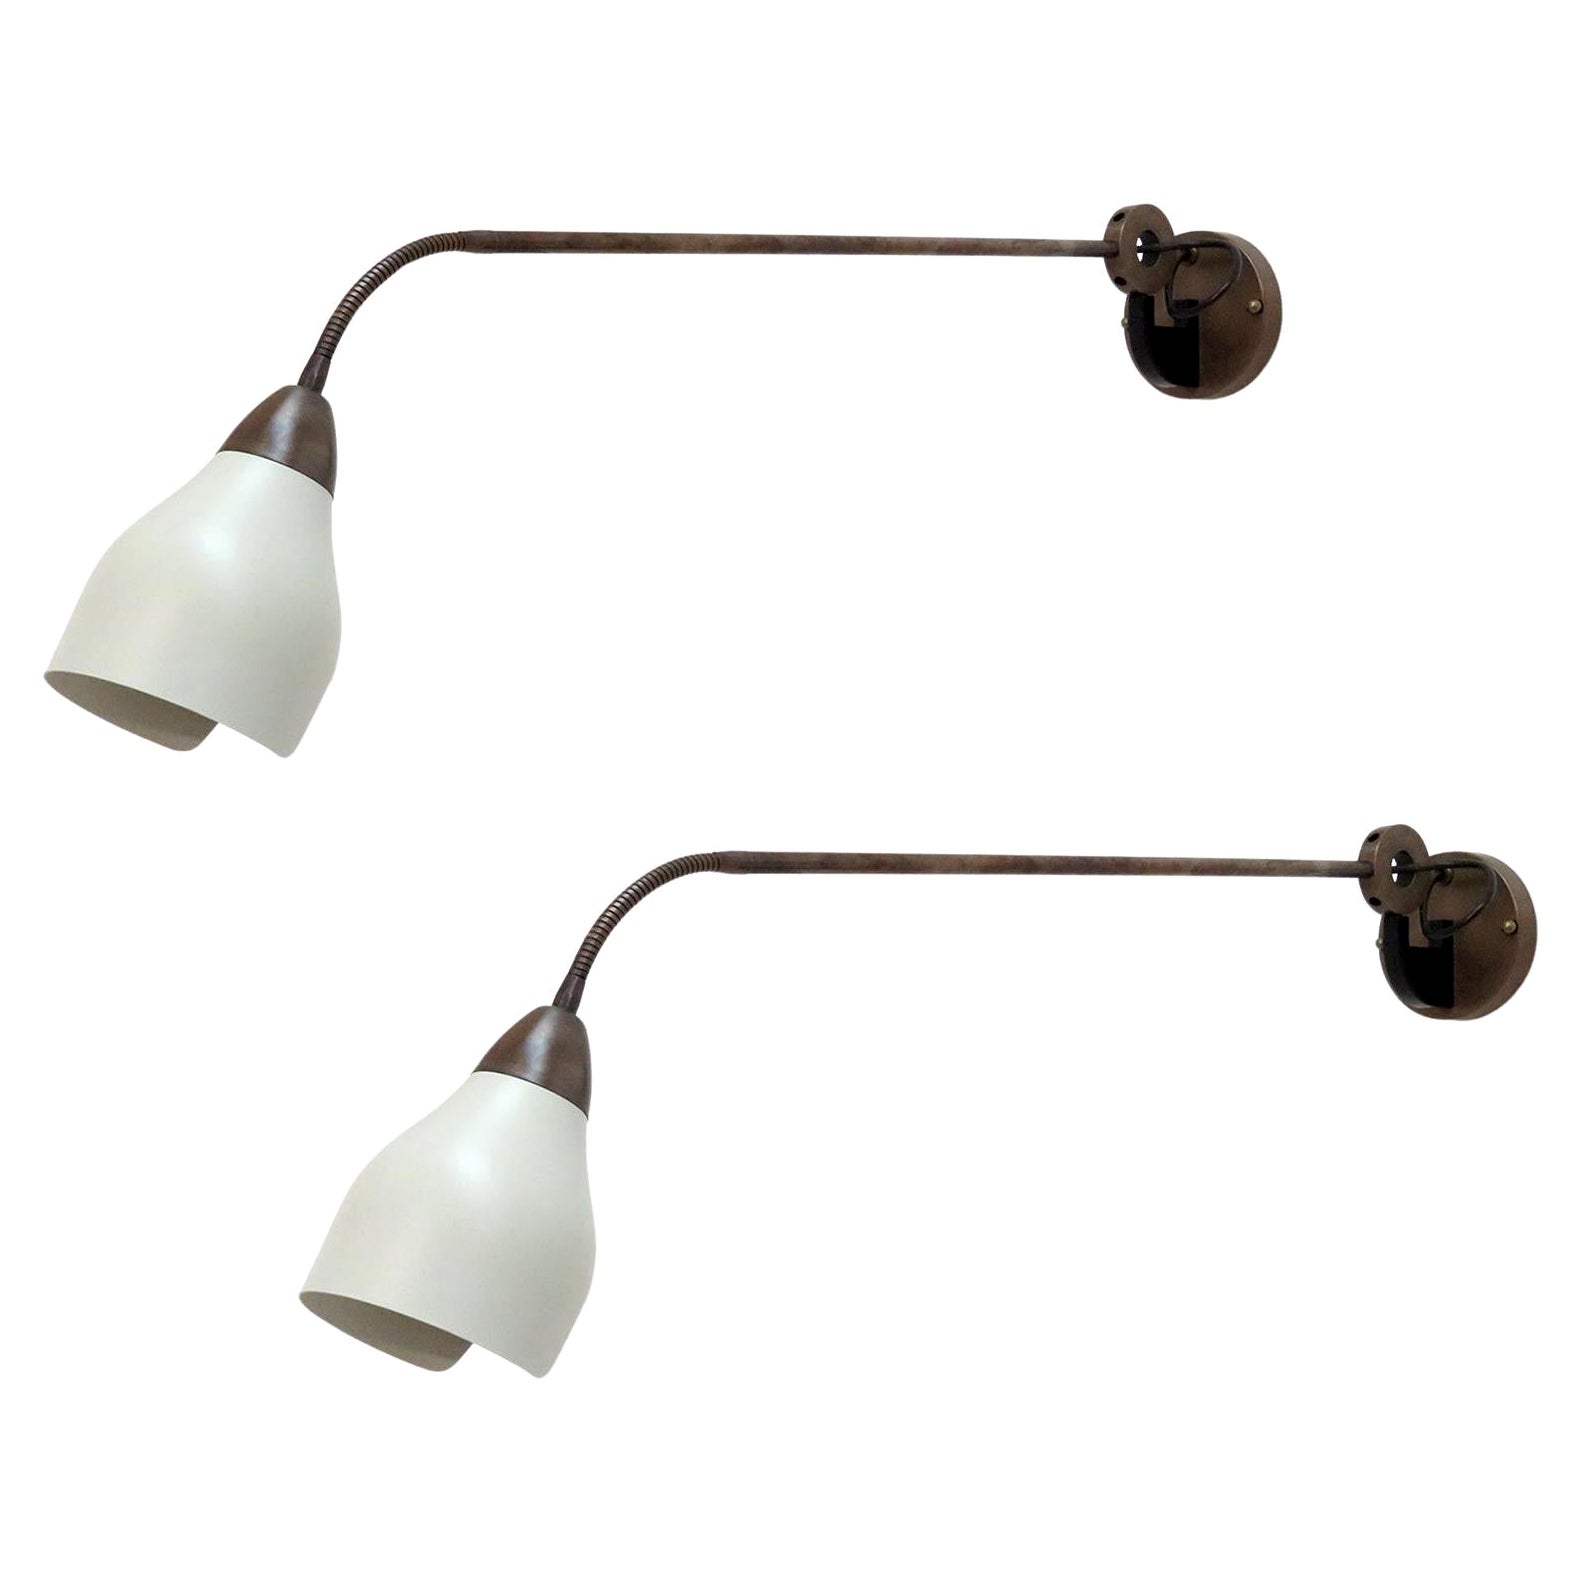 Large Articulate Italian Swing Arm Wall Lights For Sale